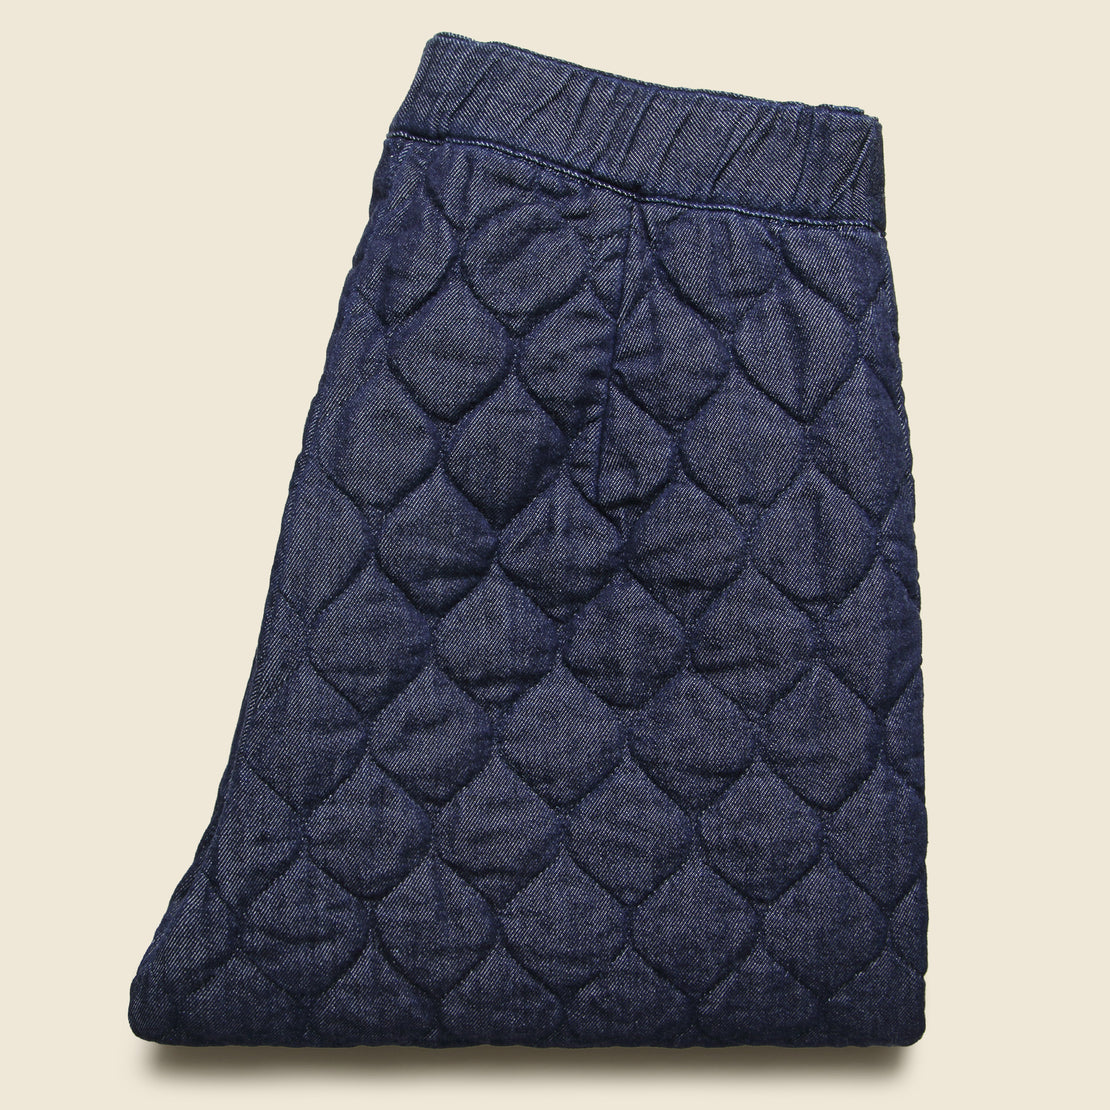 Roamer Quilted Pant - Medium Wash - Levis Made & Crafted - STAG Provisions - W - Pants - Lounge